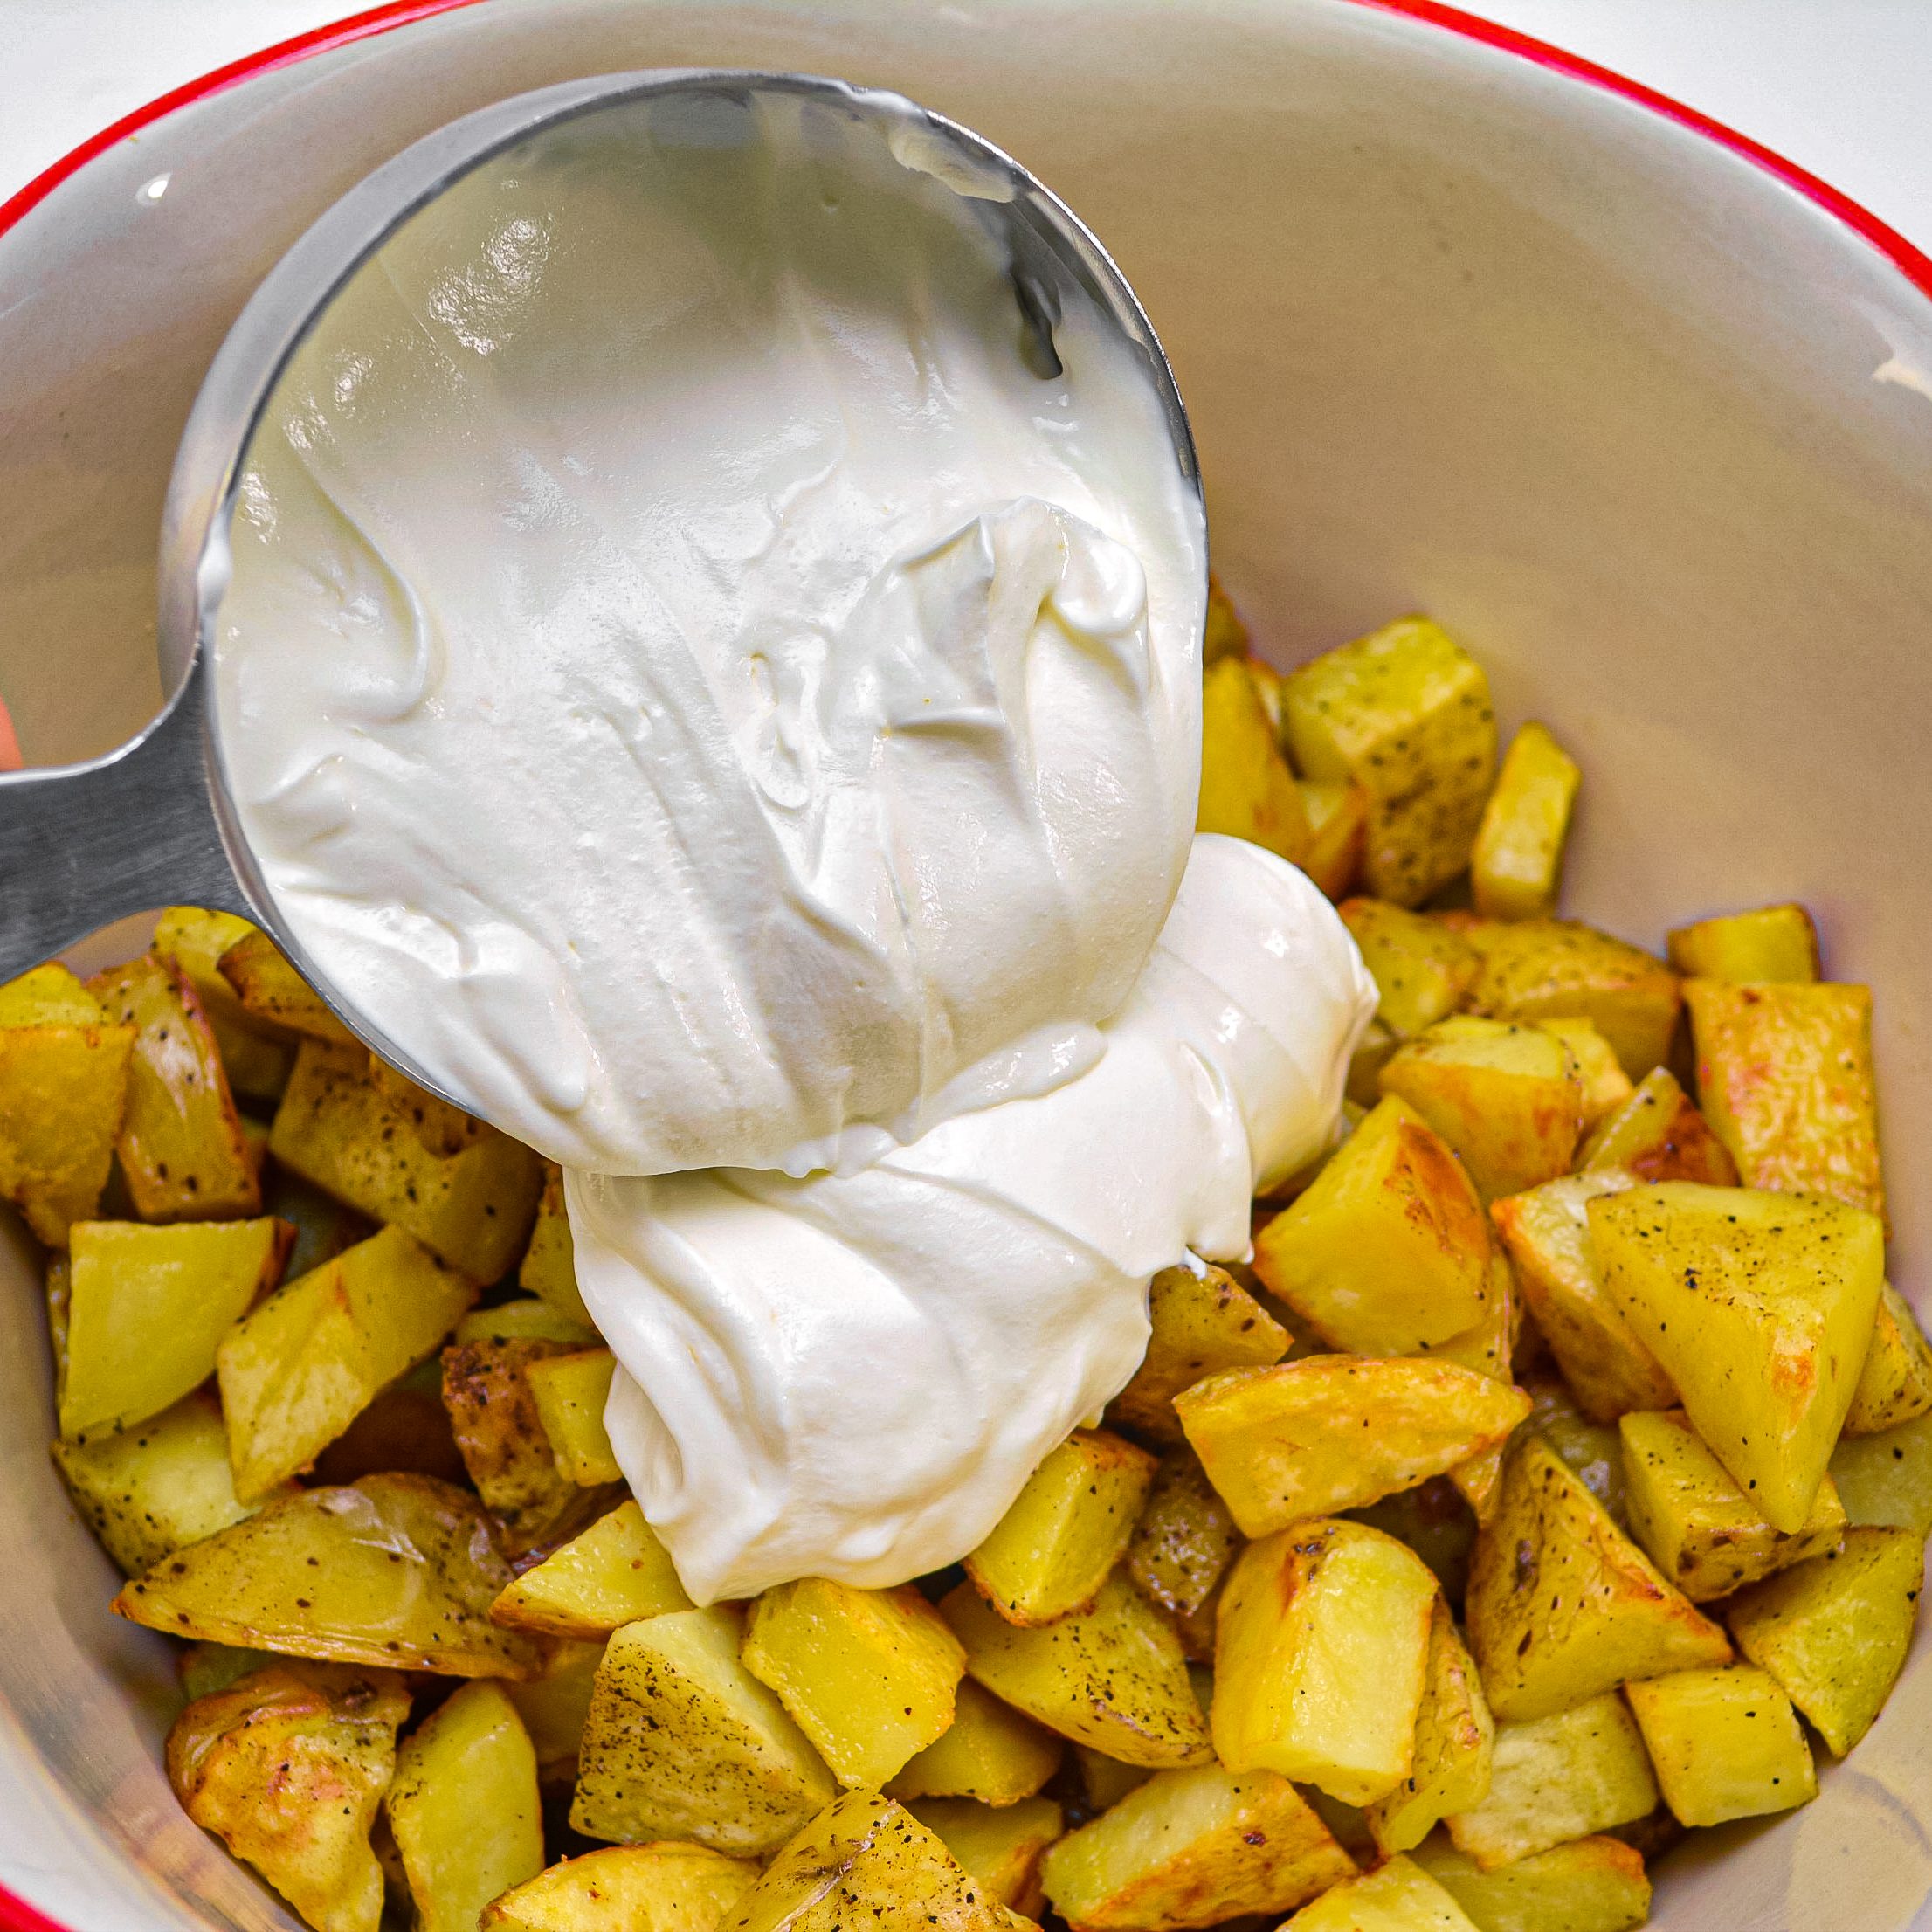 Place the cooled potatoes in a large mixing bowl, and add 1 ½ cups of sour cream. Stir carefully to combine well.